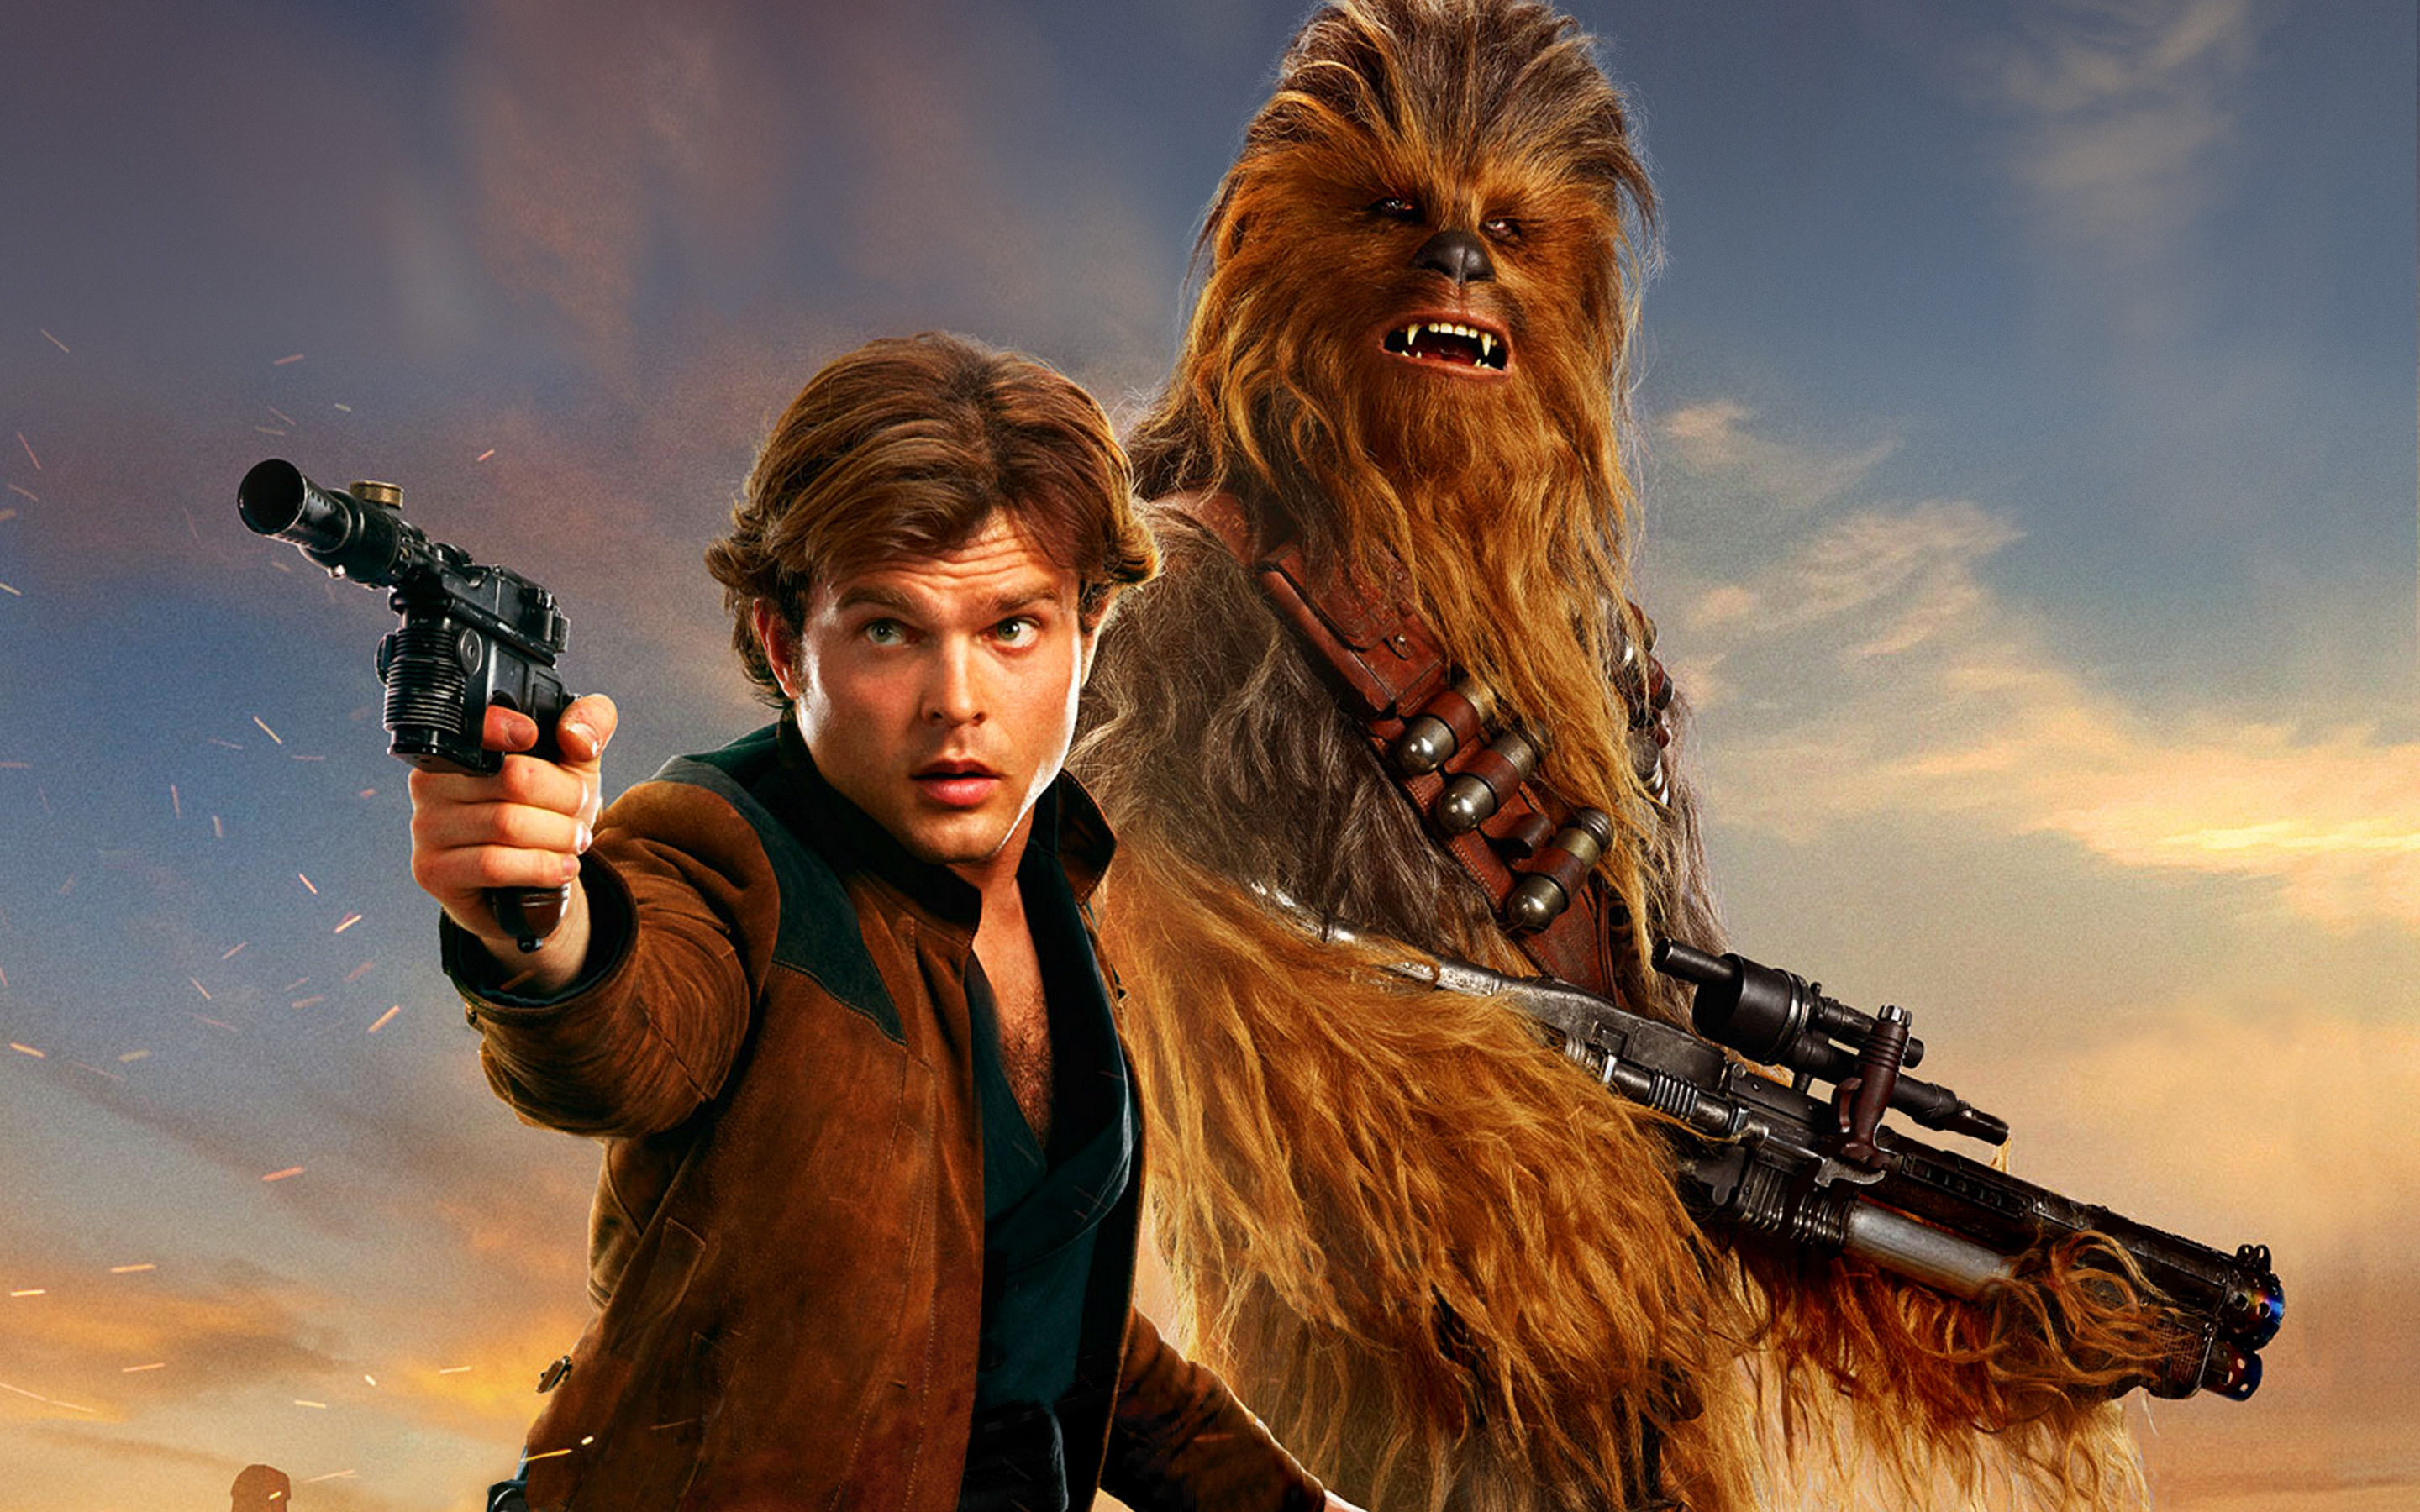 han solo wallpaper,chewbacca,fictional character,movie,cg artwork,massively multiplayer online role playing game